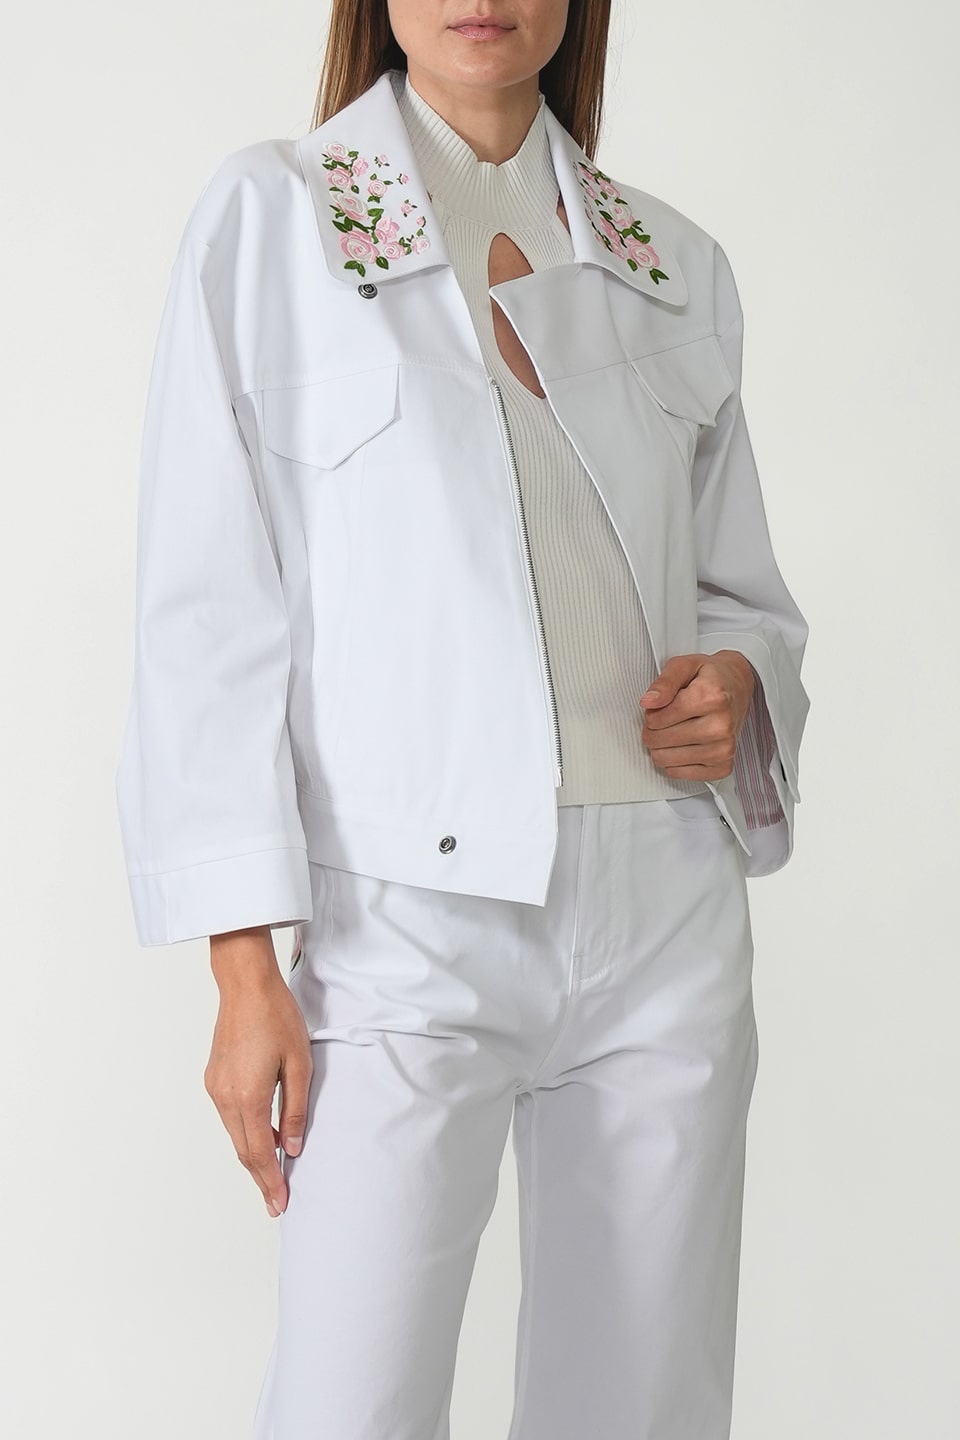 Designer White Women blazers, shop online with free delivery in UAE. Product gallery 2